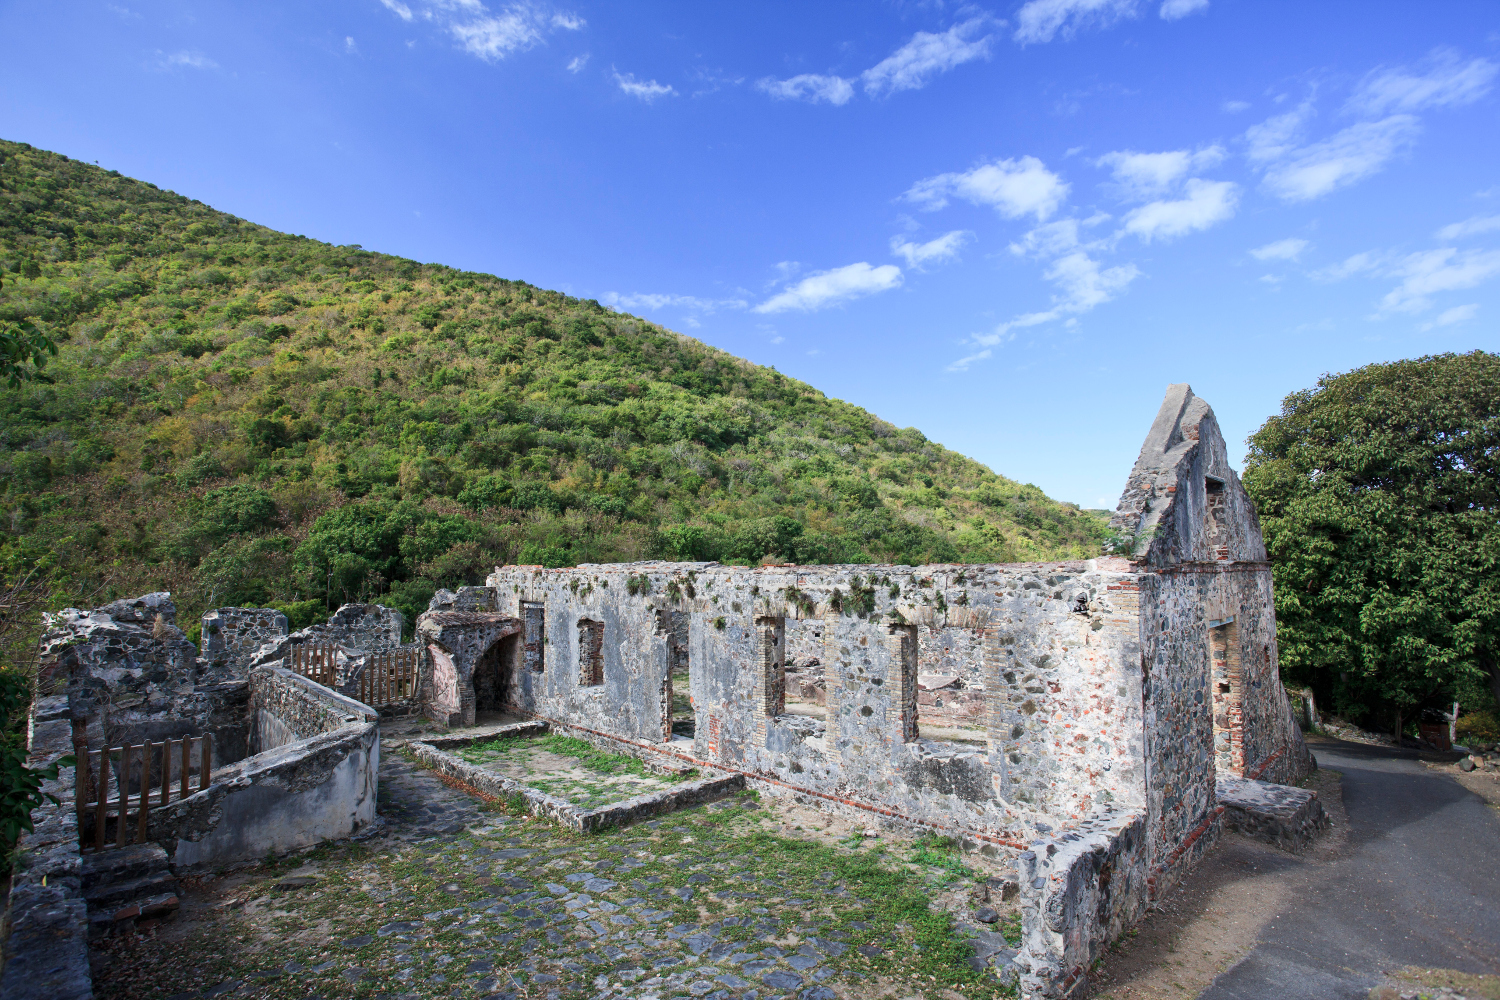 Crumbling sugar mill ruin on St John, Virgin Islands National Park. Image by Michele Falzone / AWL Images / Getty